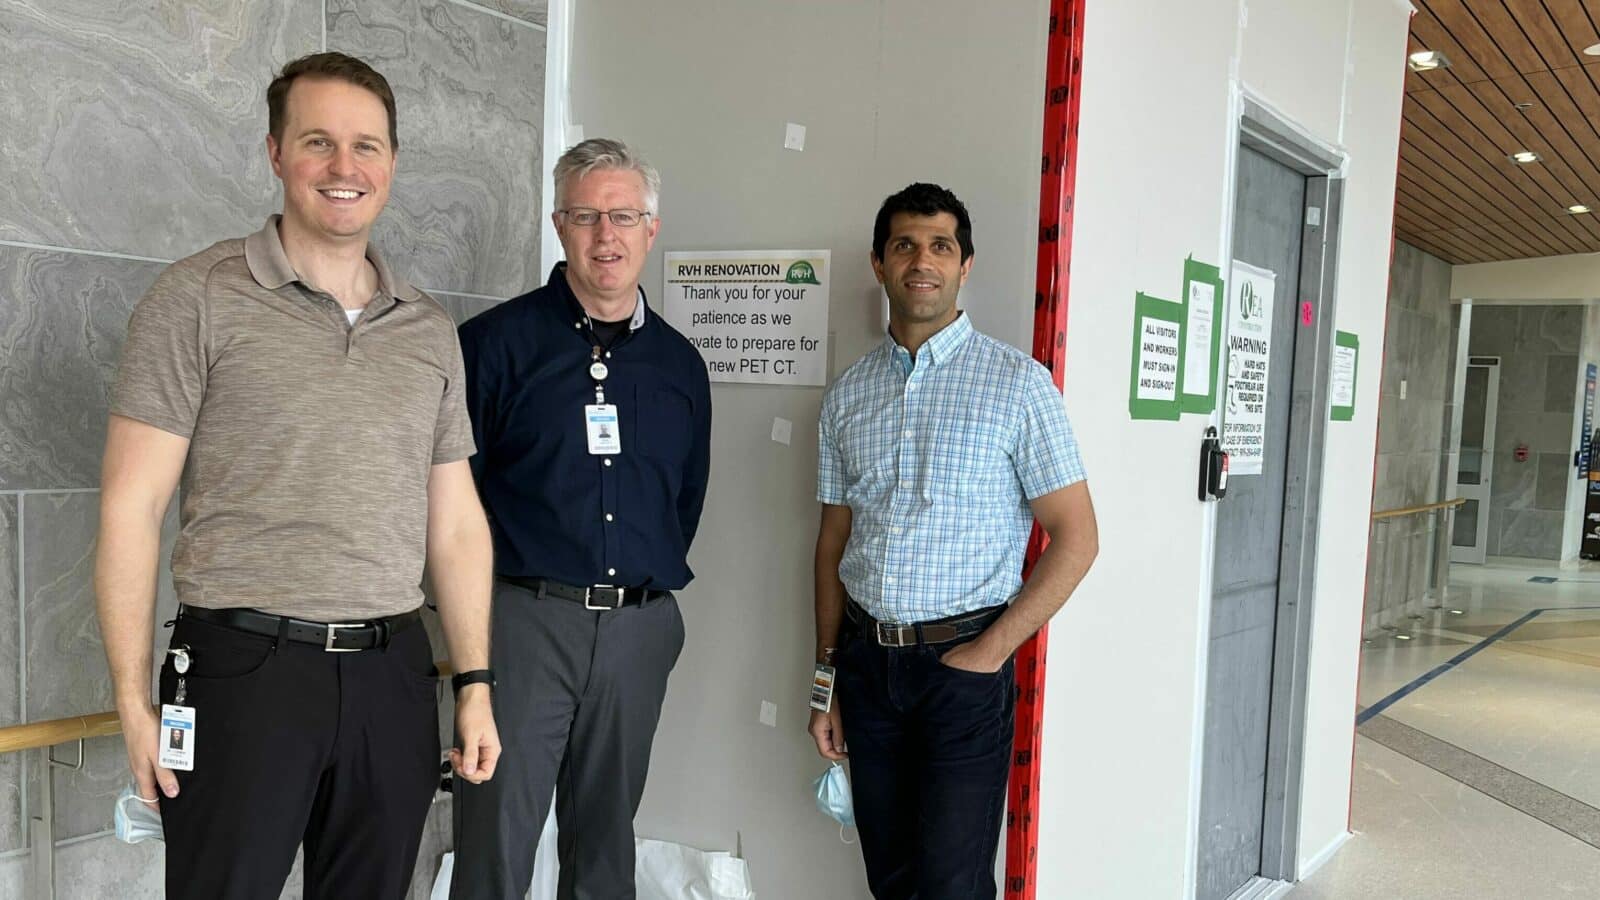 Radiologist and PET-CT Lead, Dr. Cory Ozimok, Manager of Medical Imaging, David Wilson and Medical Director of Imaging, Dr. Raj Grover stand outside the area where construction is underway to make space for the new PET-CT scanner at RVH.